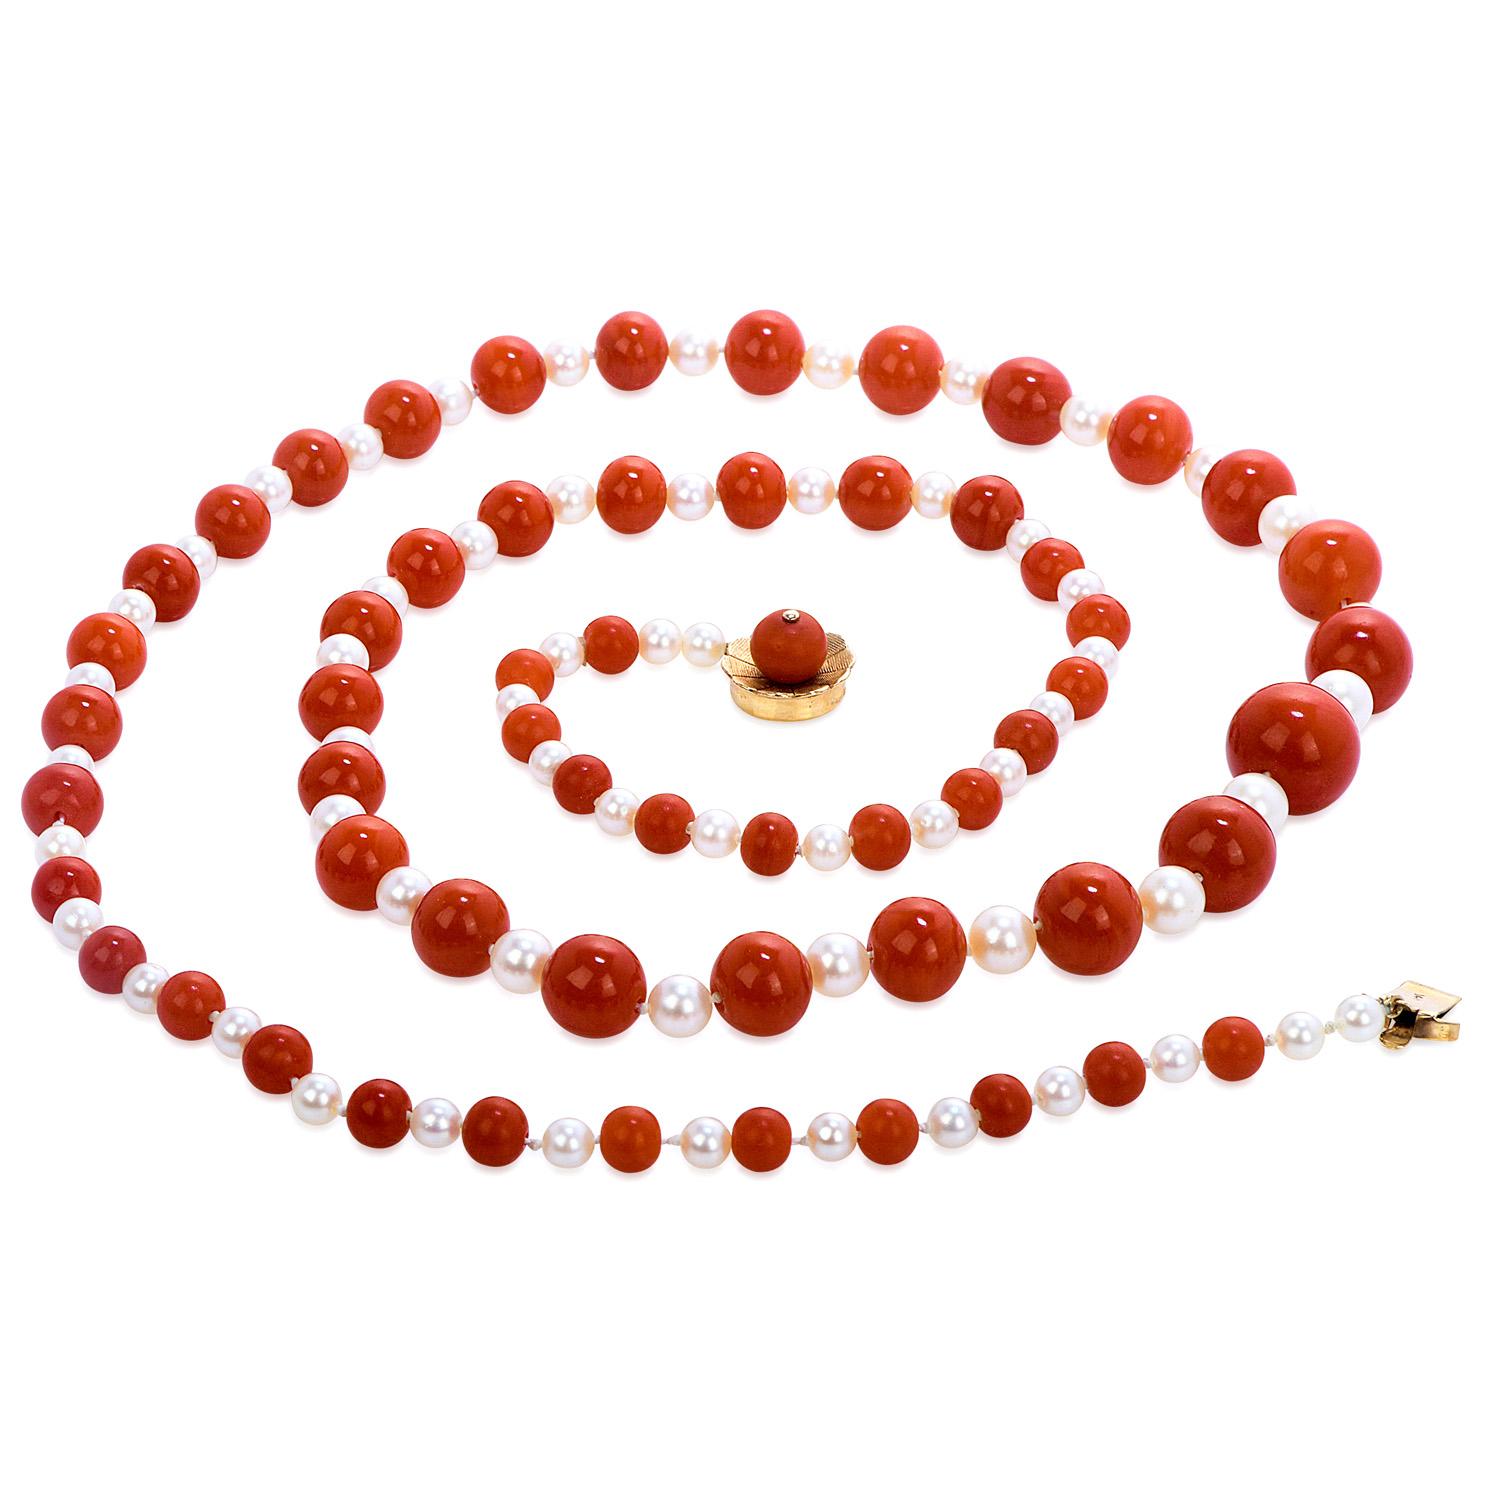 Vintage 1960's Large Graduated Style with red-Coral & Pearls beaded necklace,

the clasp is crafted in solid 14K yellow gold, this piece is formed by 4.5 mm to 7 mm Saltwater Pearls, with natural blemishes & high luster, intertwined with GIA